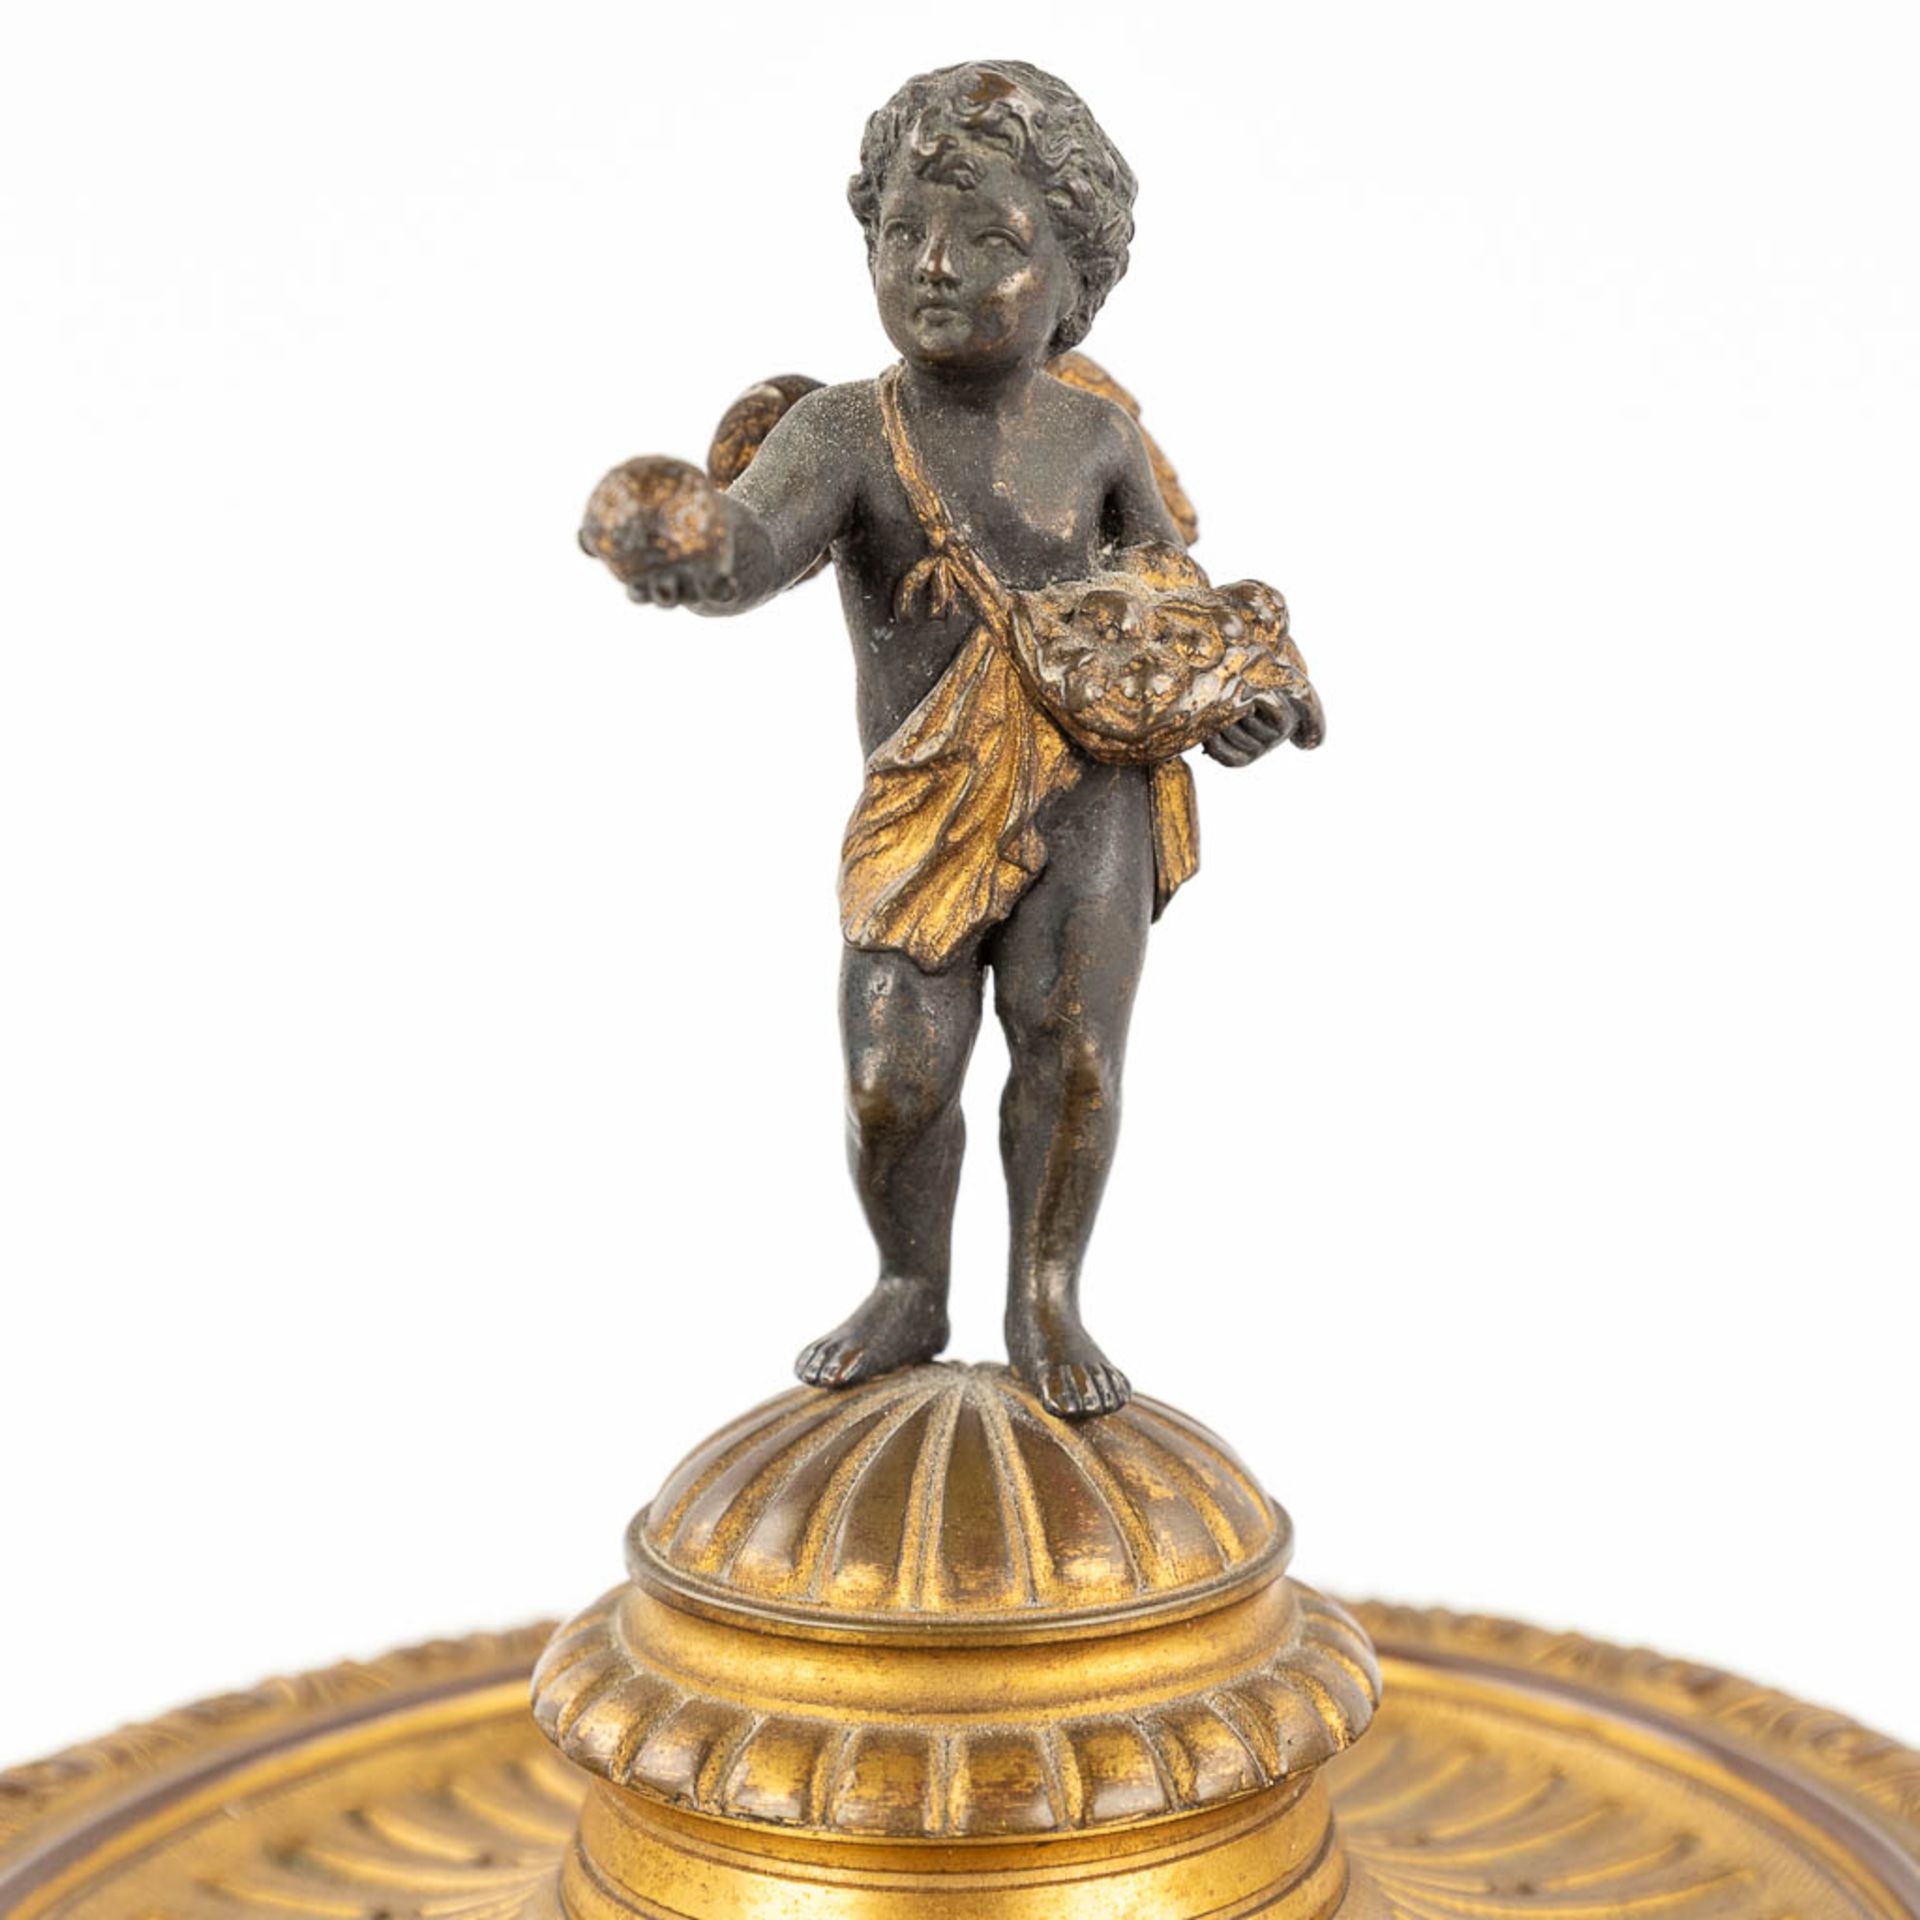 An antique trophy, made of gilt and patinated bronze. 19th C. (L: 16 x W: 22 x H: 27 cm) - Image 11 of 14